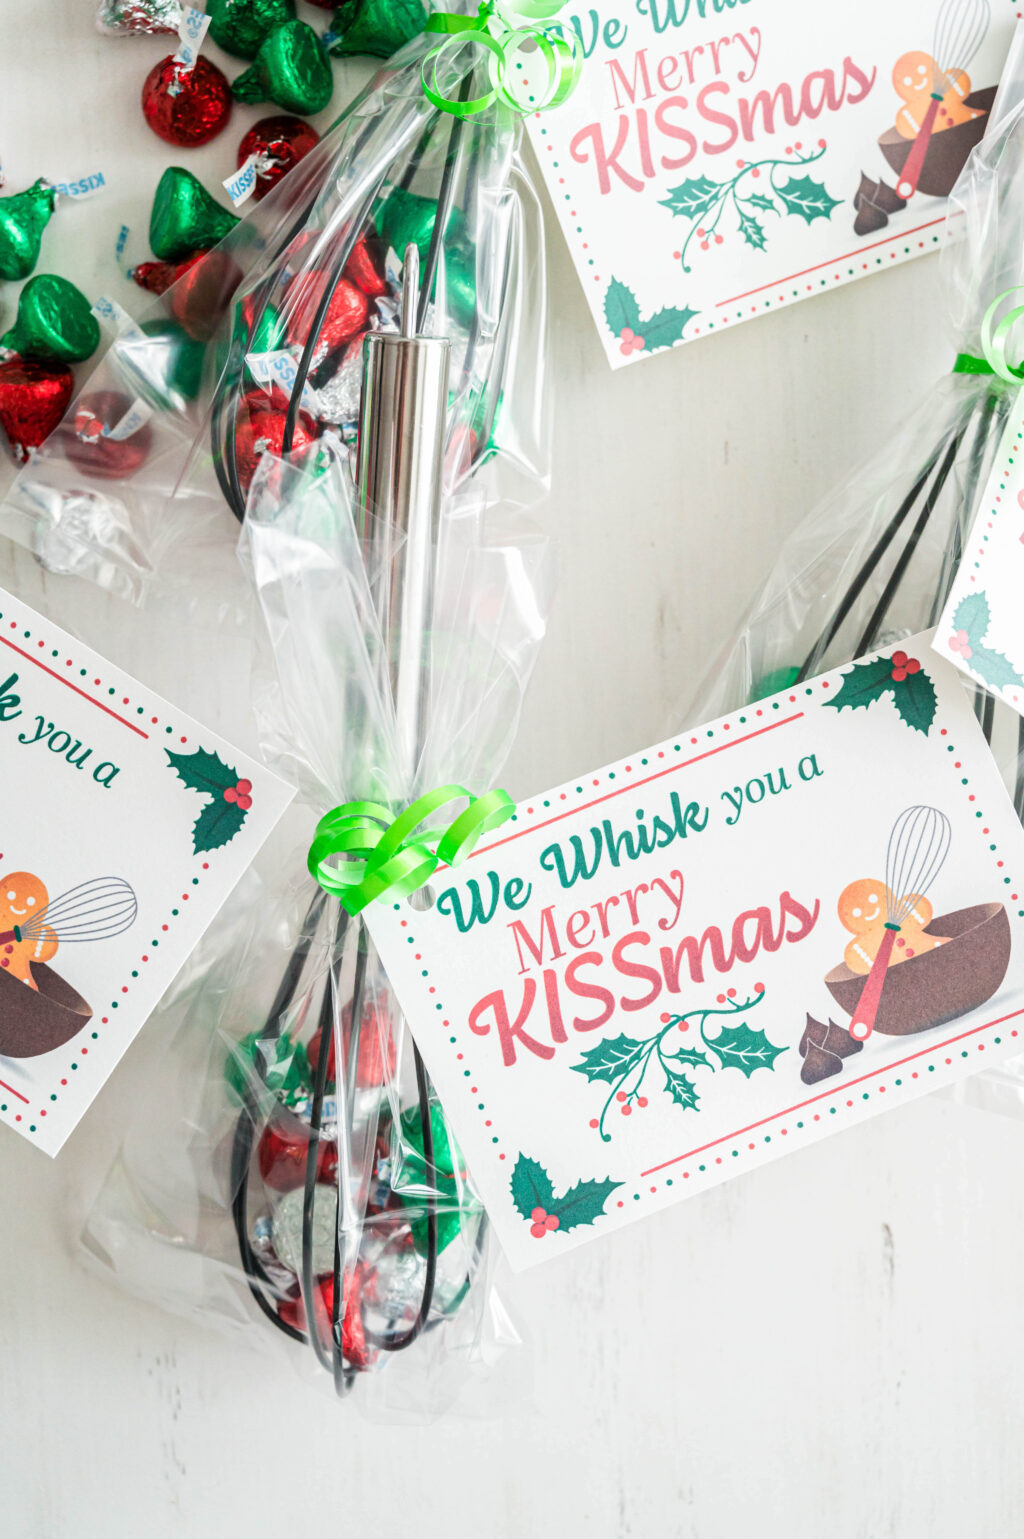 we whisk you a merry kissmas gift on table